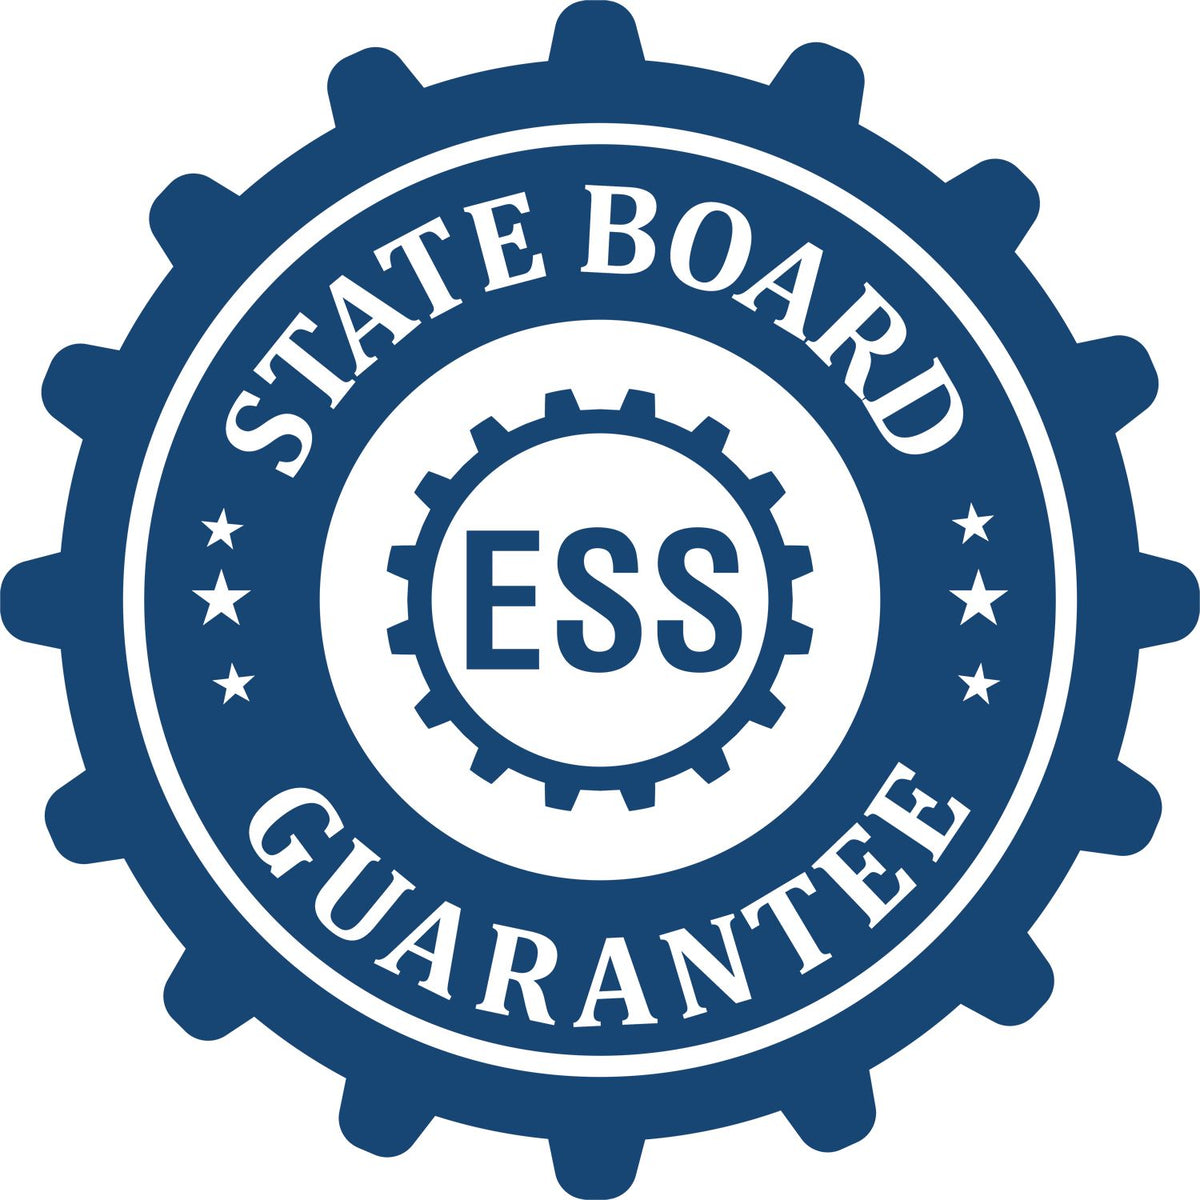 An emblem in a gear shape illustrating a state board guarantee for the Digital West Virginia Landscape Architect Stamp product.